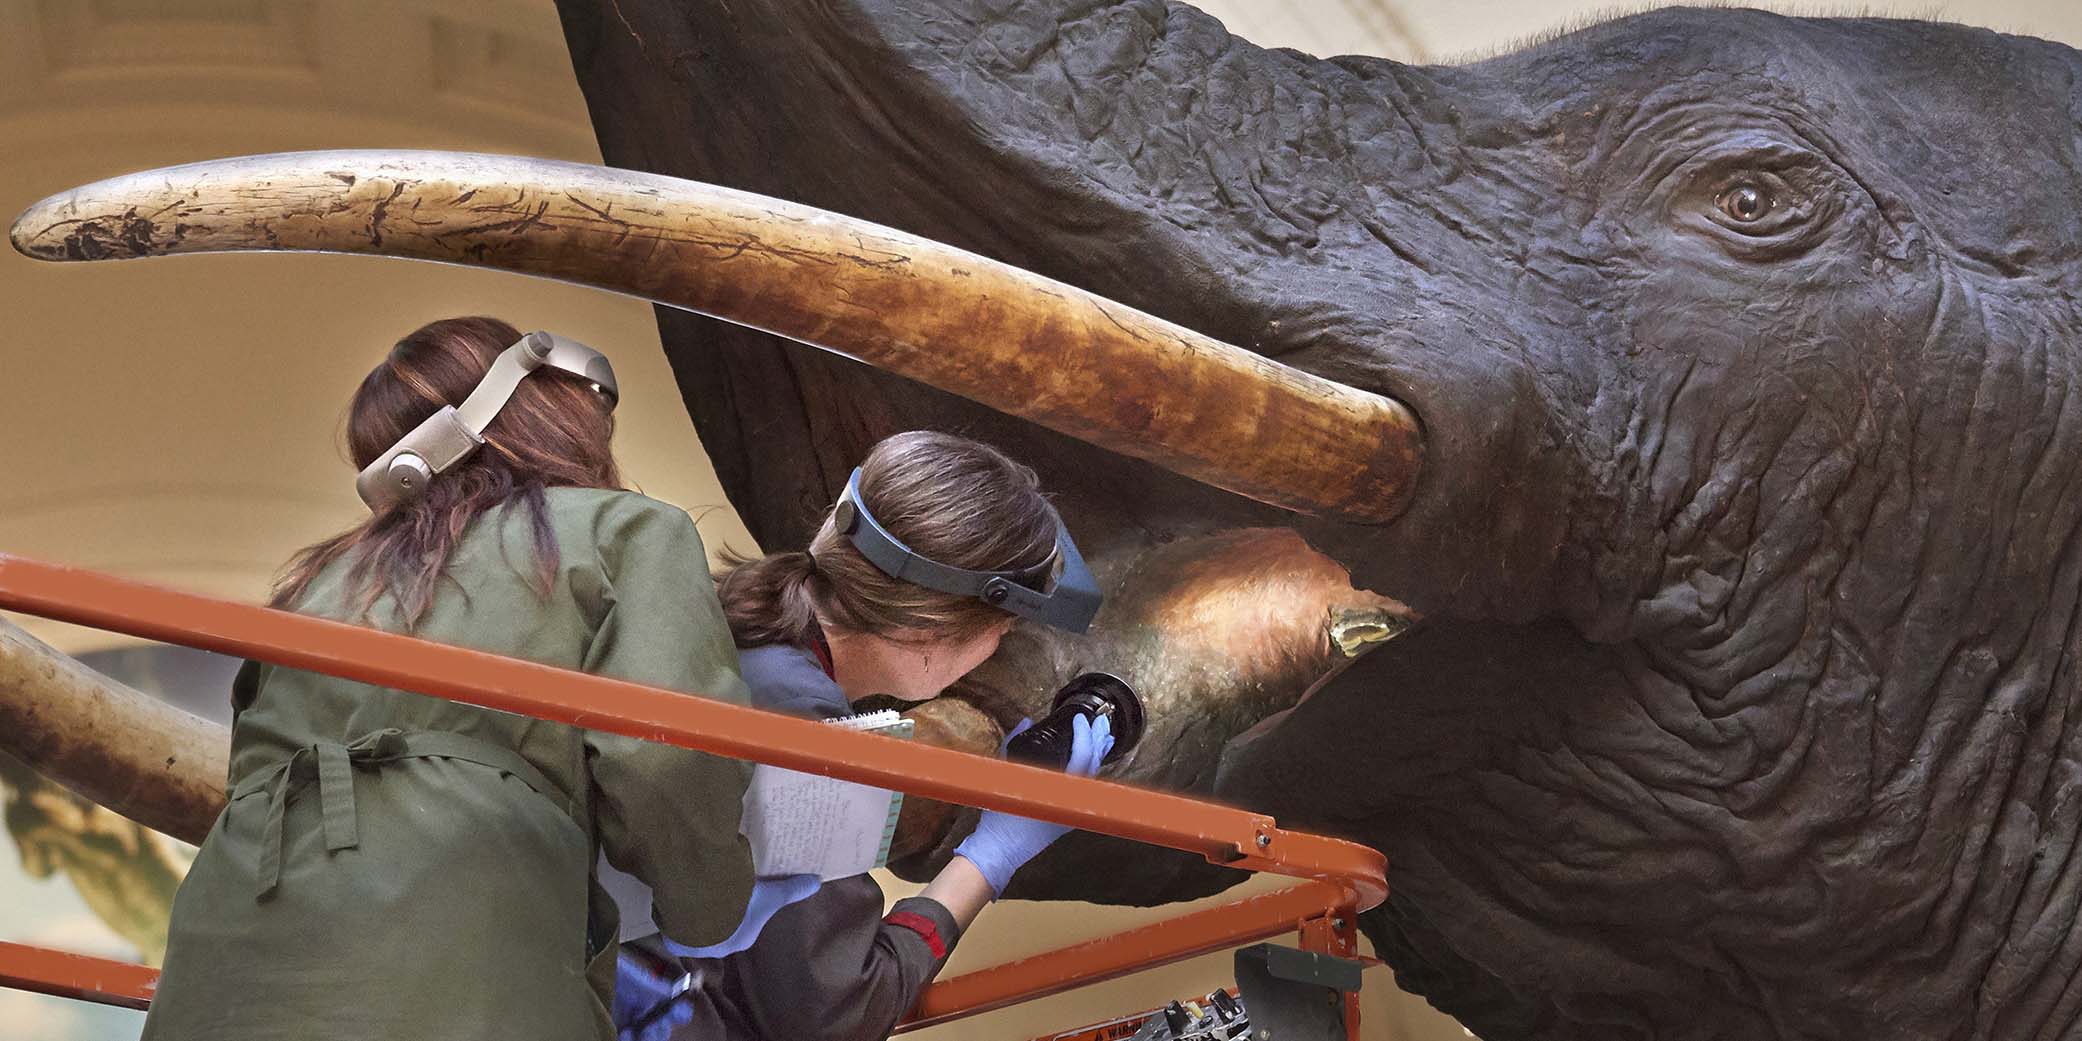 Two women wearing headlamps peer into the mouth of a large taxidermy elephant